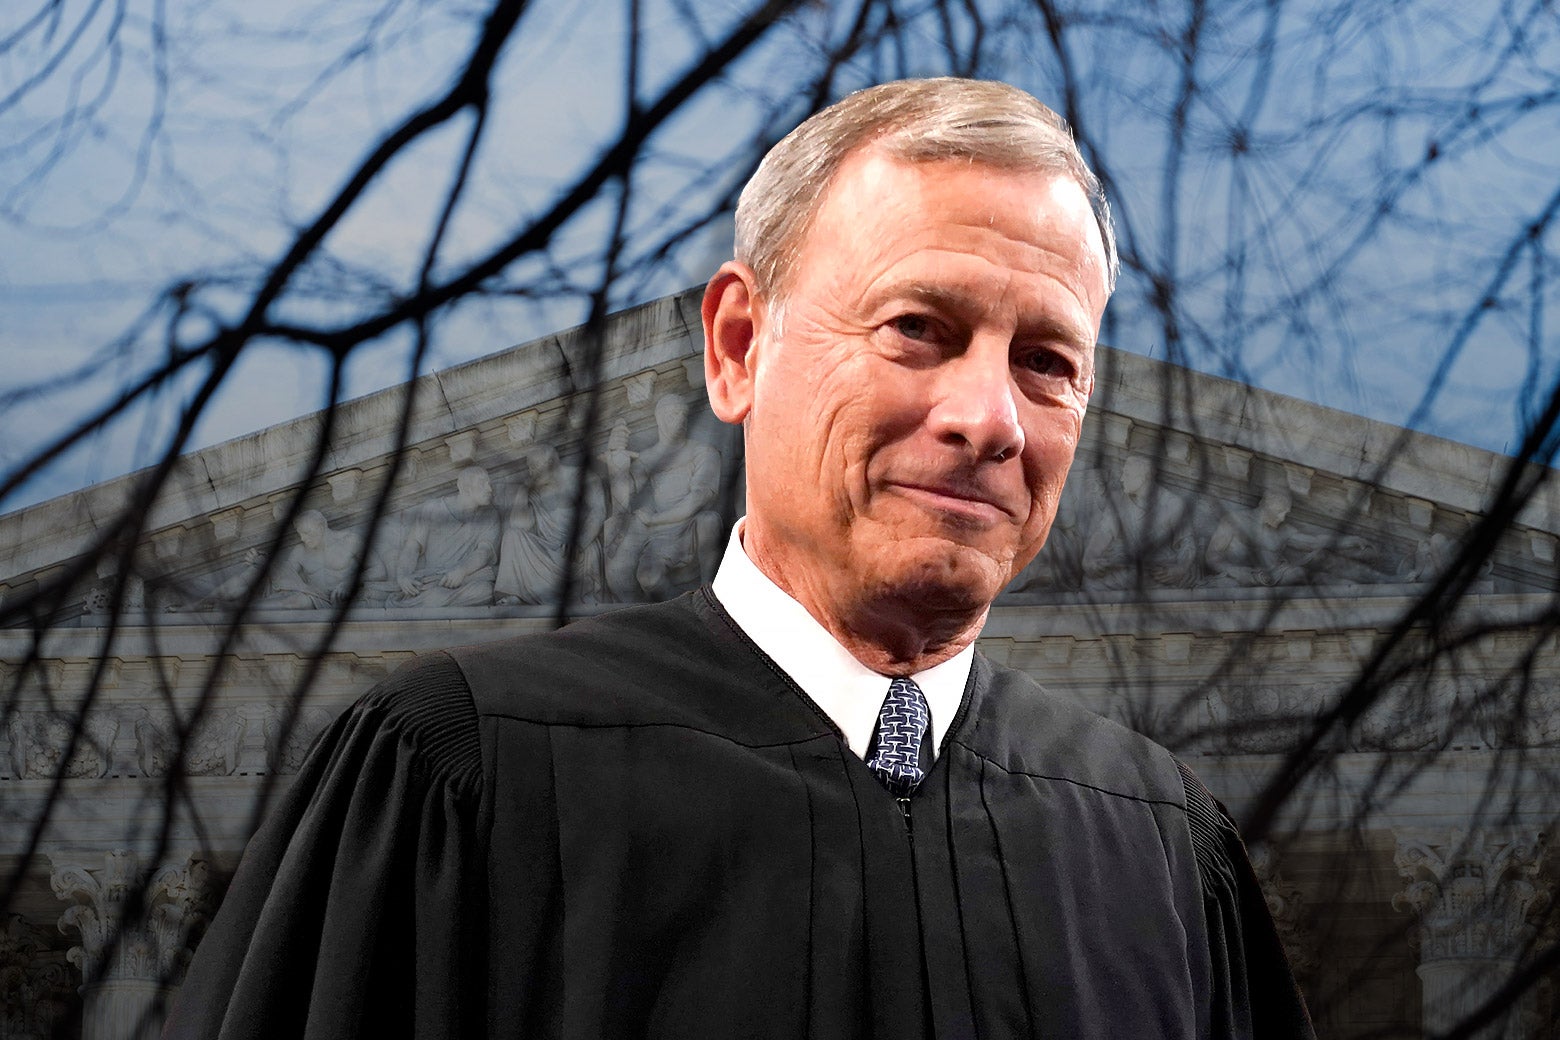 Chief Justice John Roberts smiling with the Supreme Court at his back.